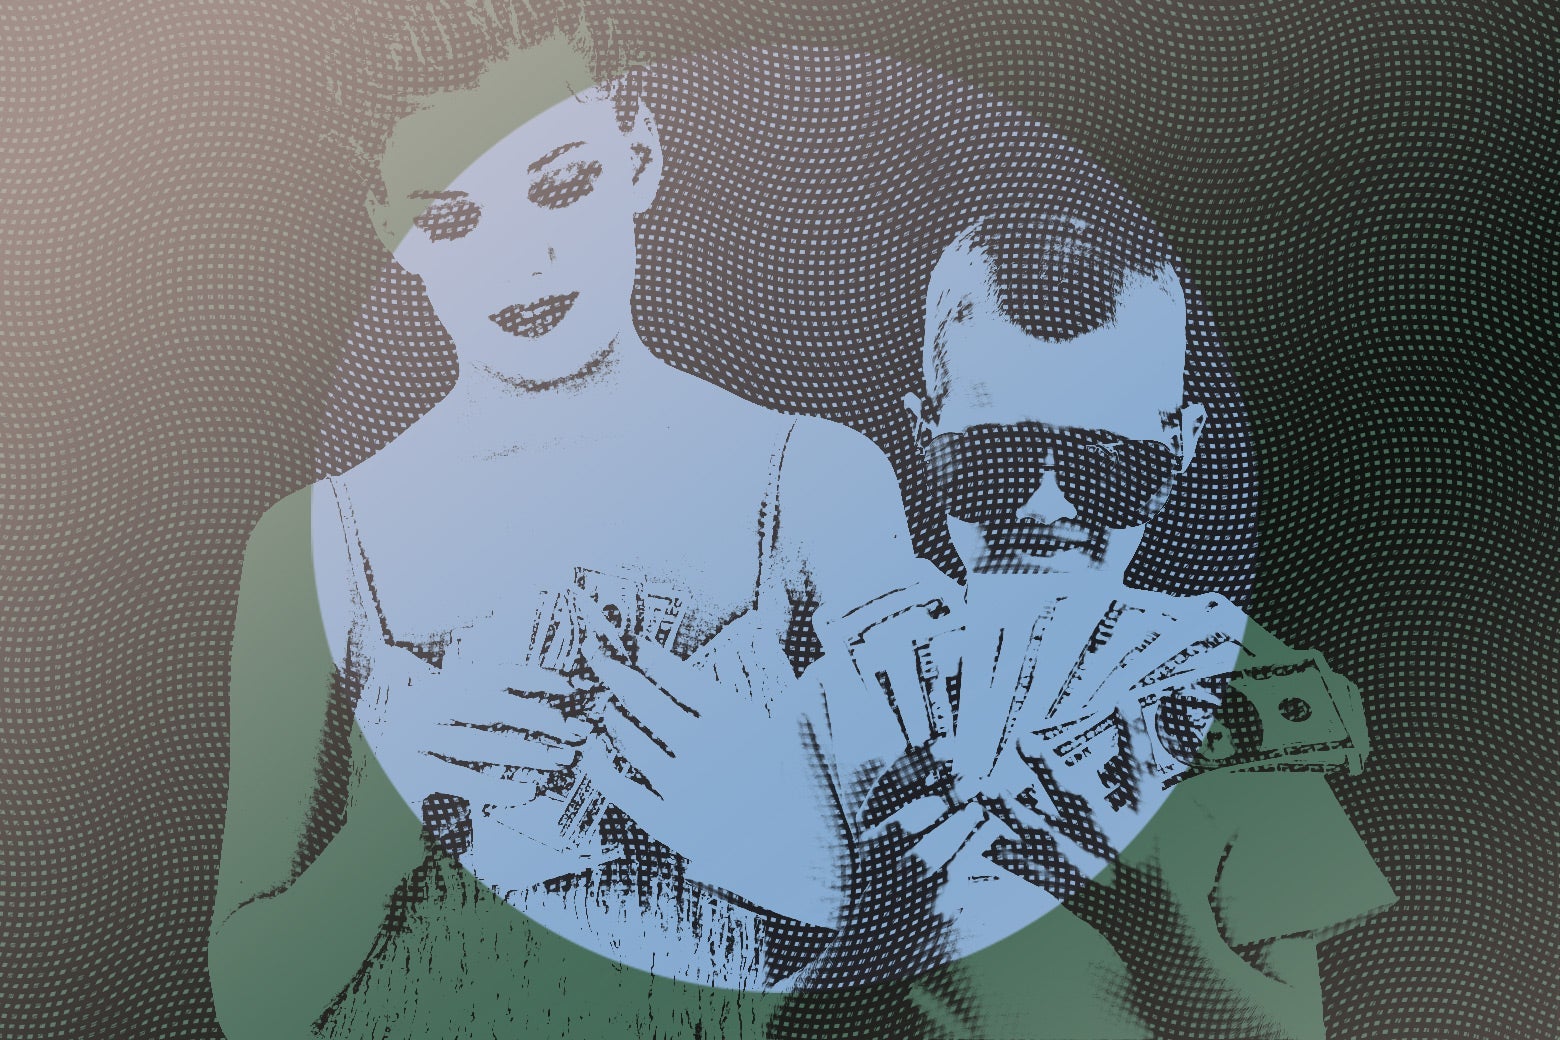 A teen girl and younger boy smile at wads of cash in their hands